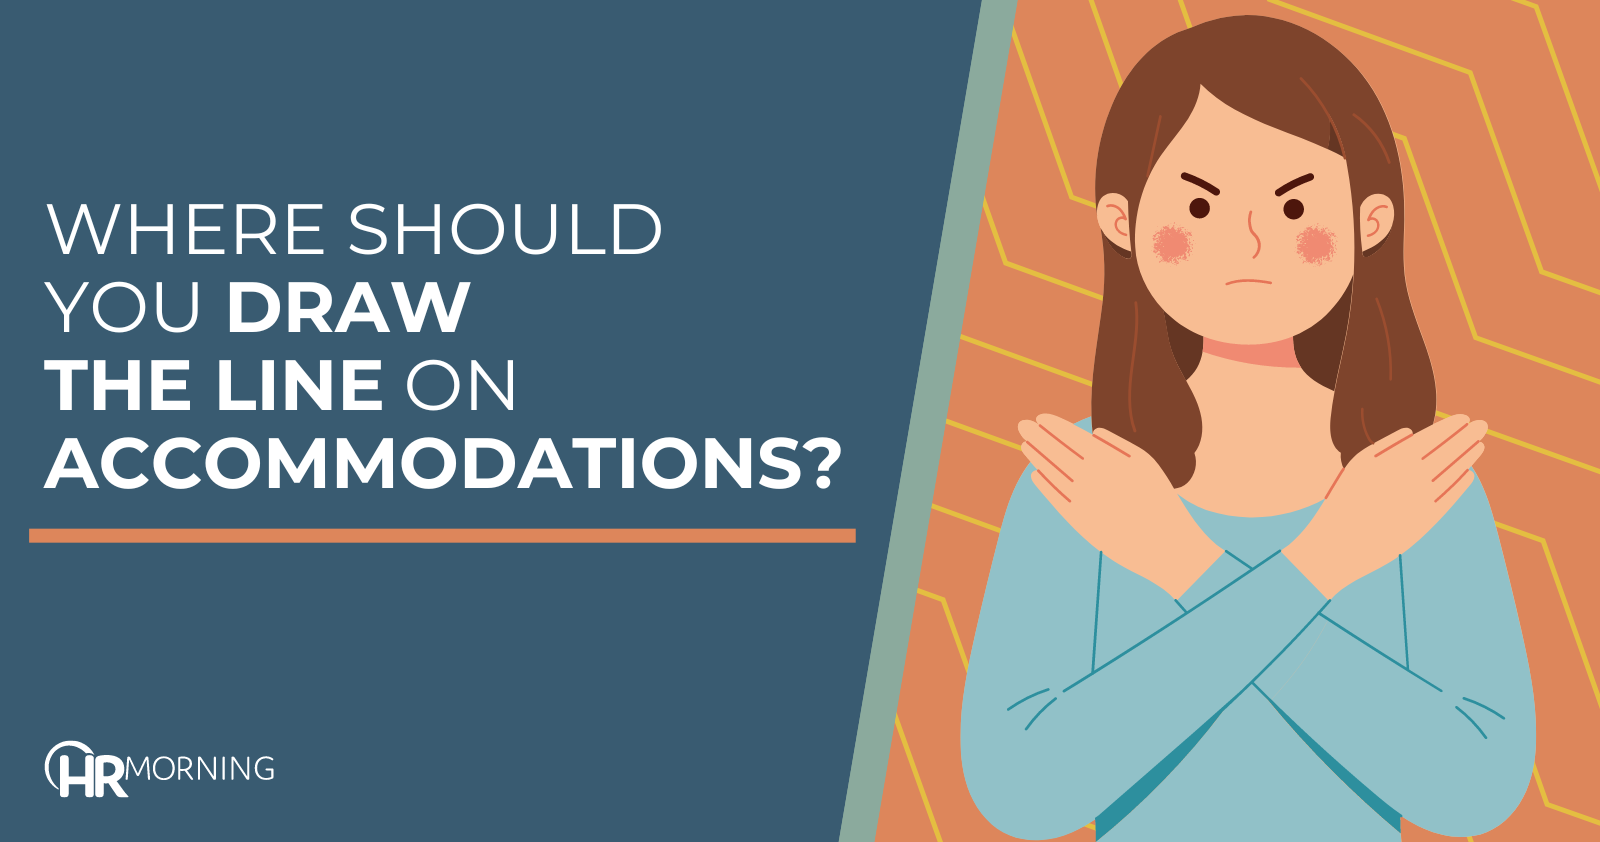 Where should you draw the line on accommodations?